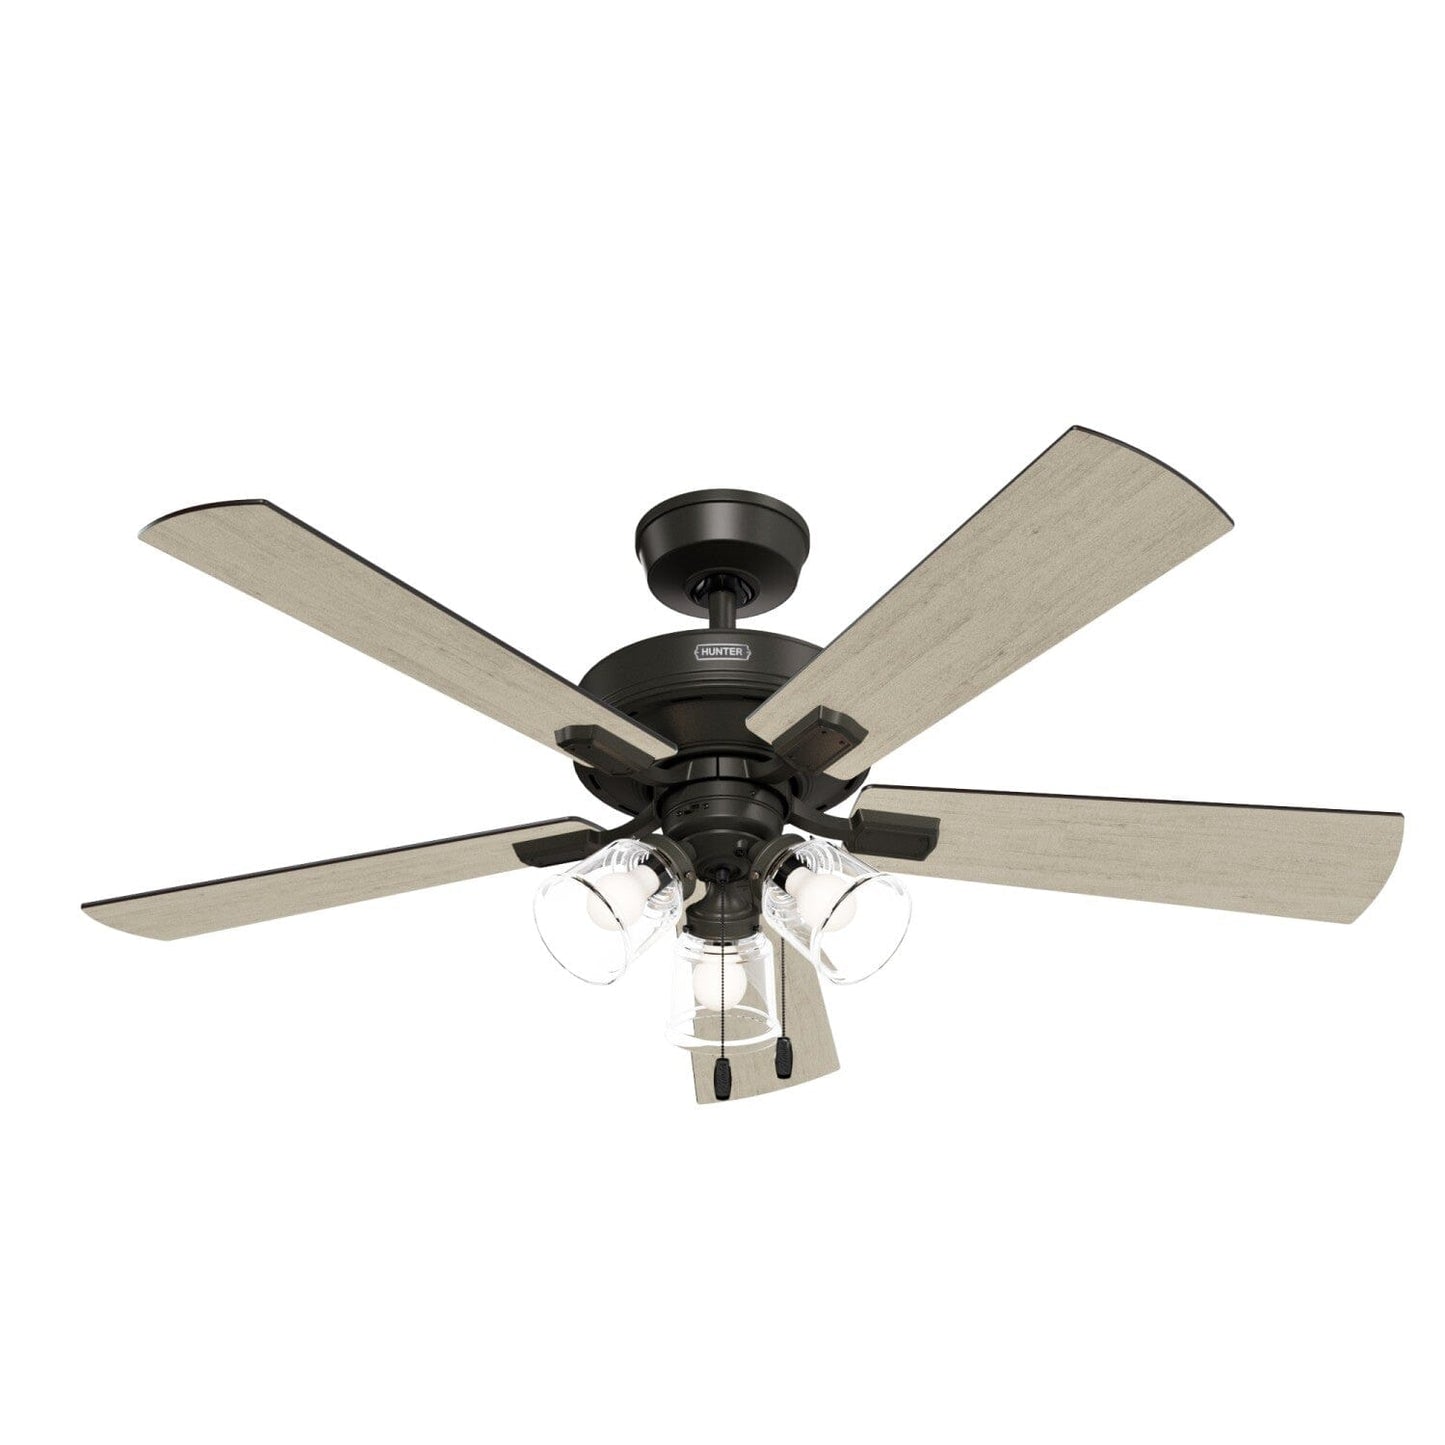 Crestfield HunterExpress with 3 LED Lights 52 inch Ceiling Fans Hunter Noble Bronze - Bleached Grey Pine 